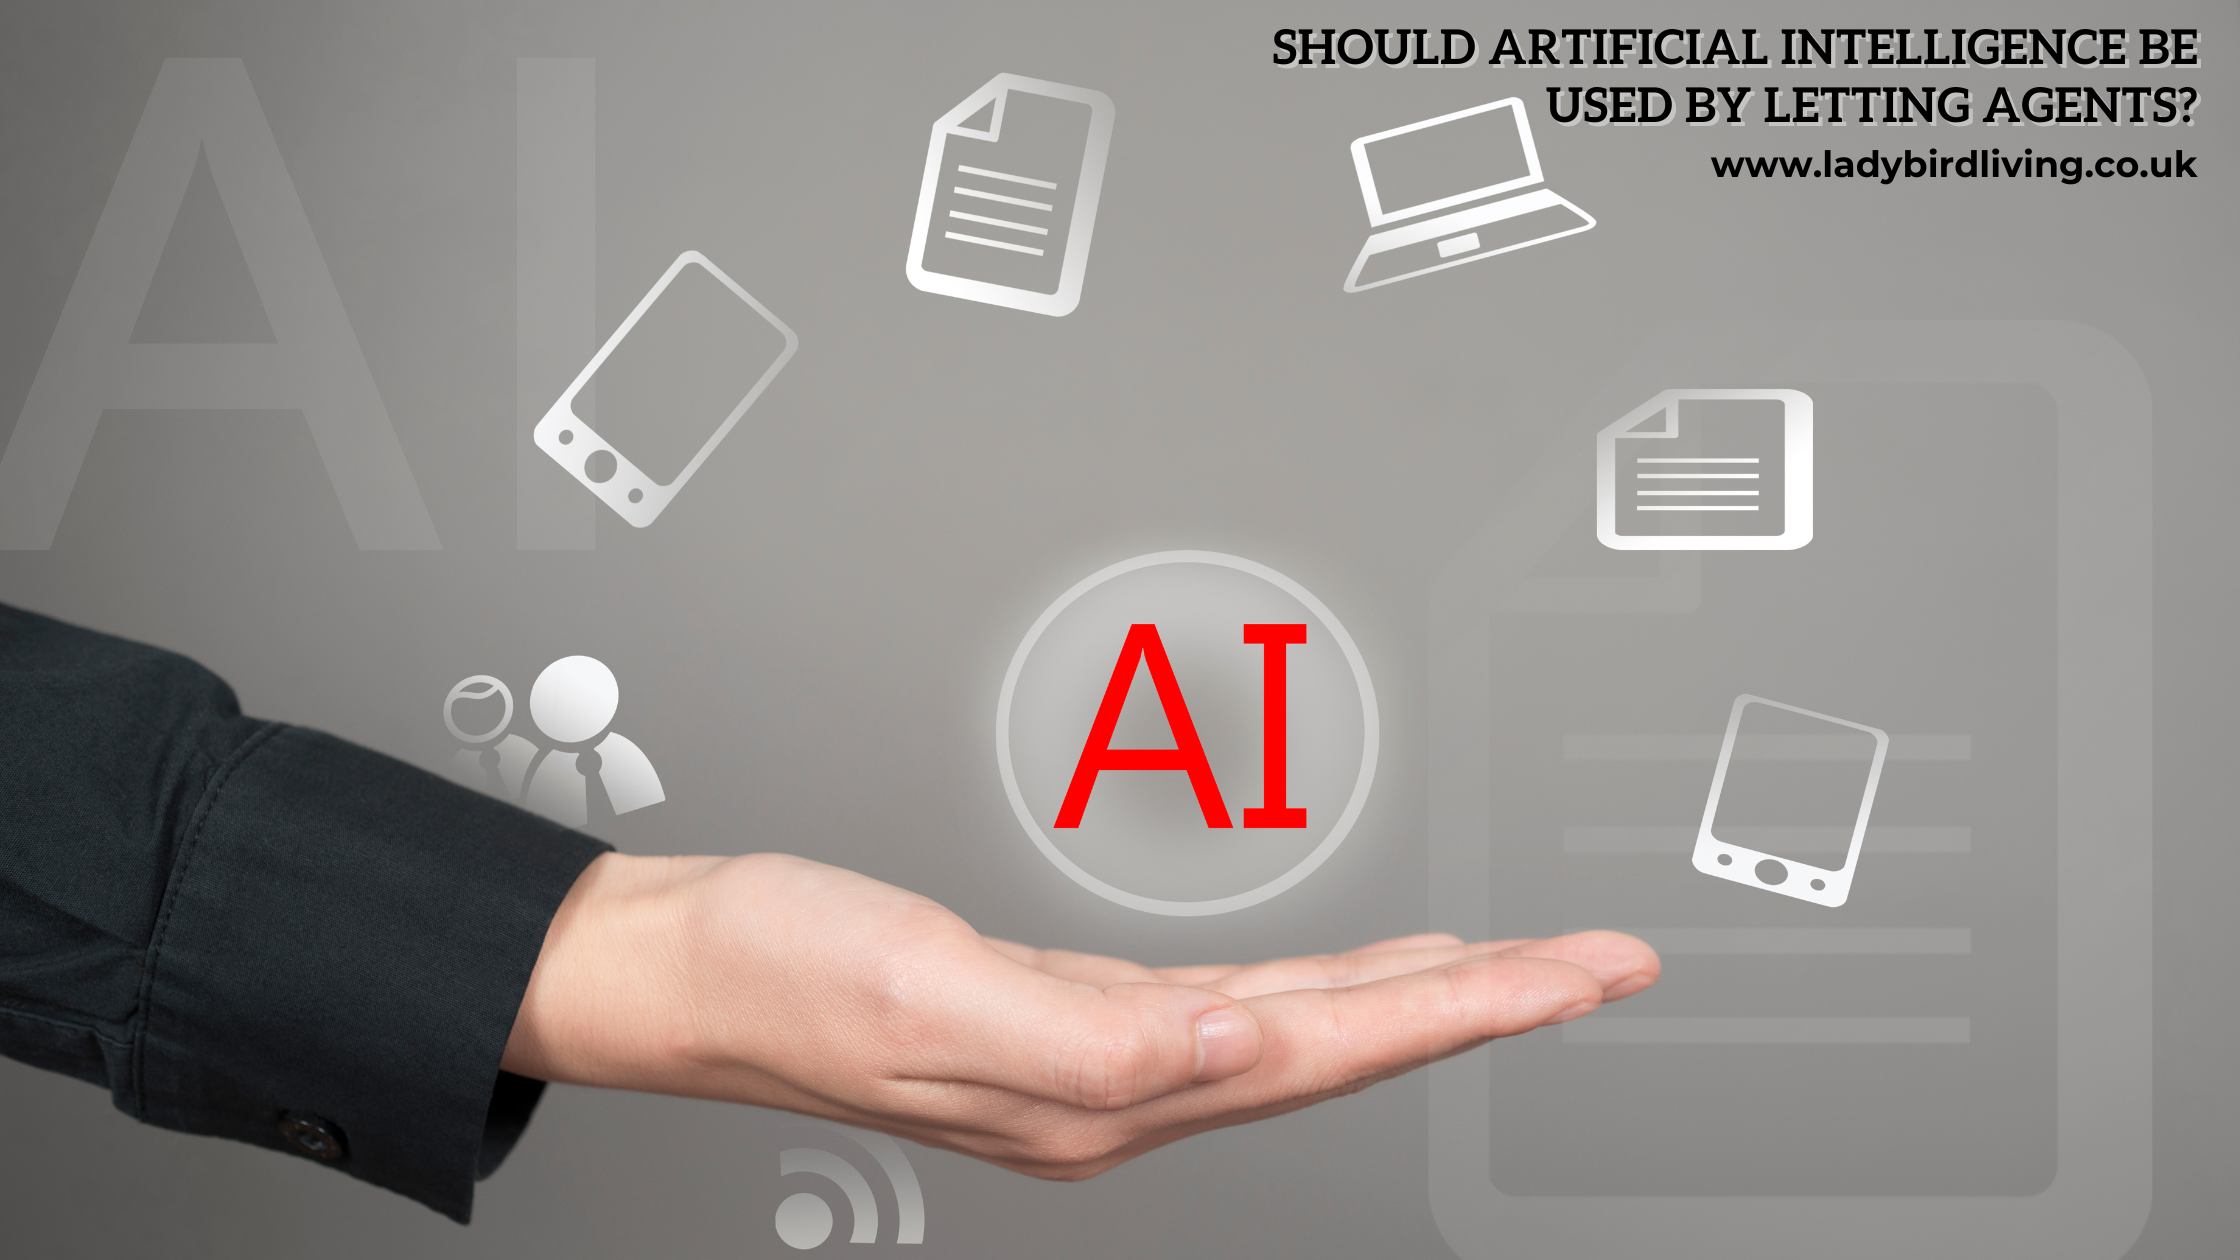 Should Artificial Intelligence be used by letting agents?